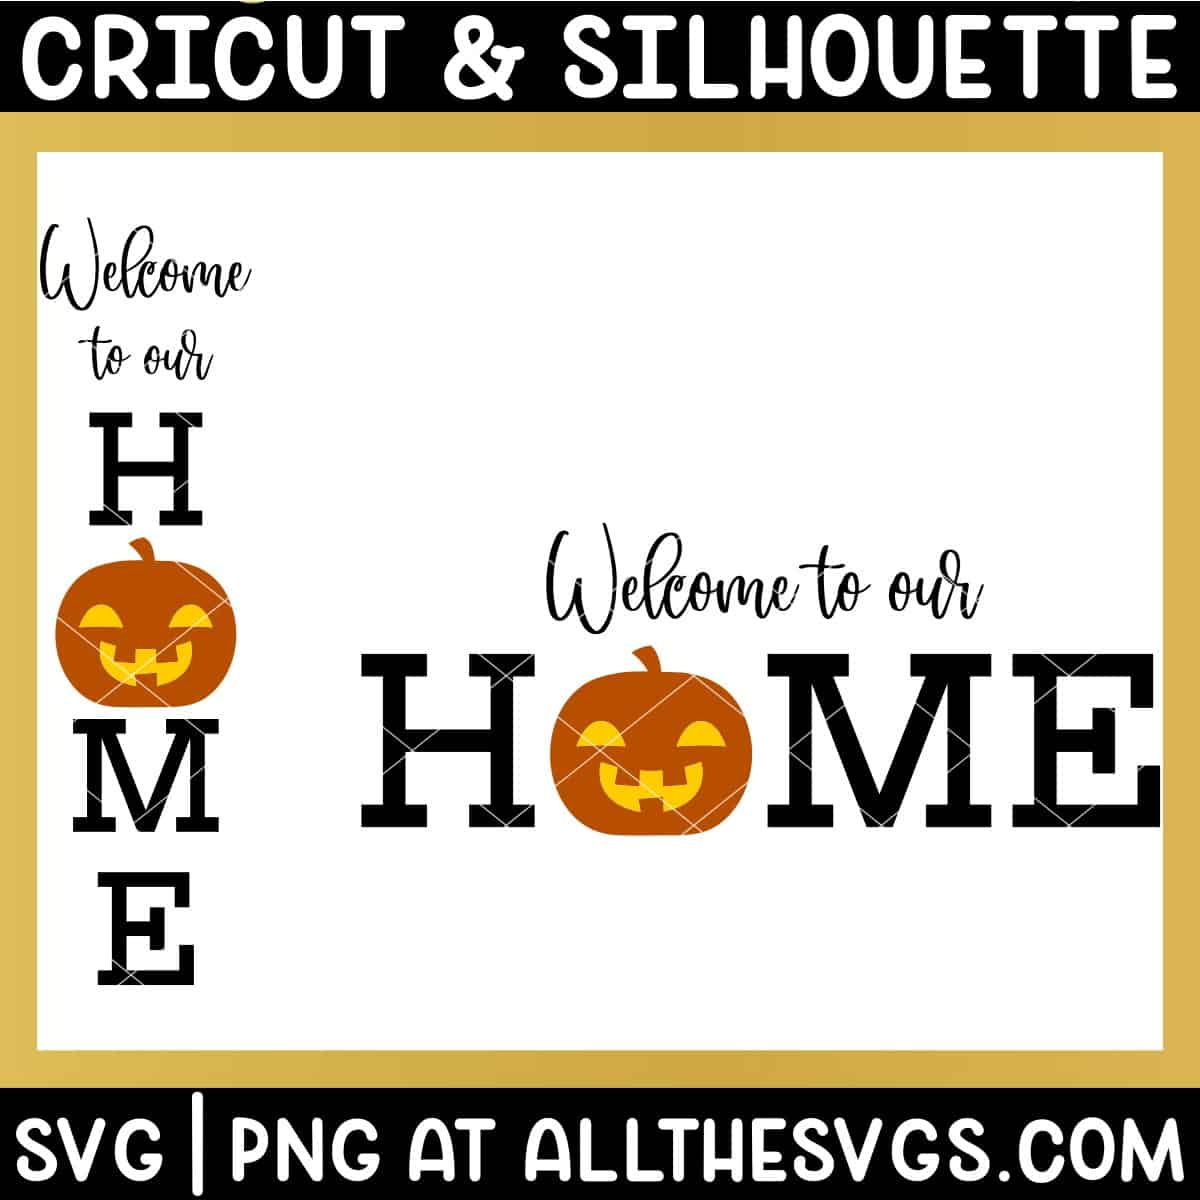 welcome to our home sign svg file with jack o lantern.